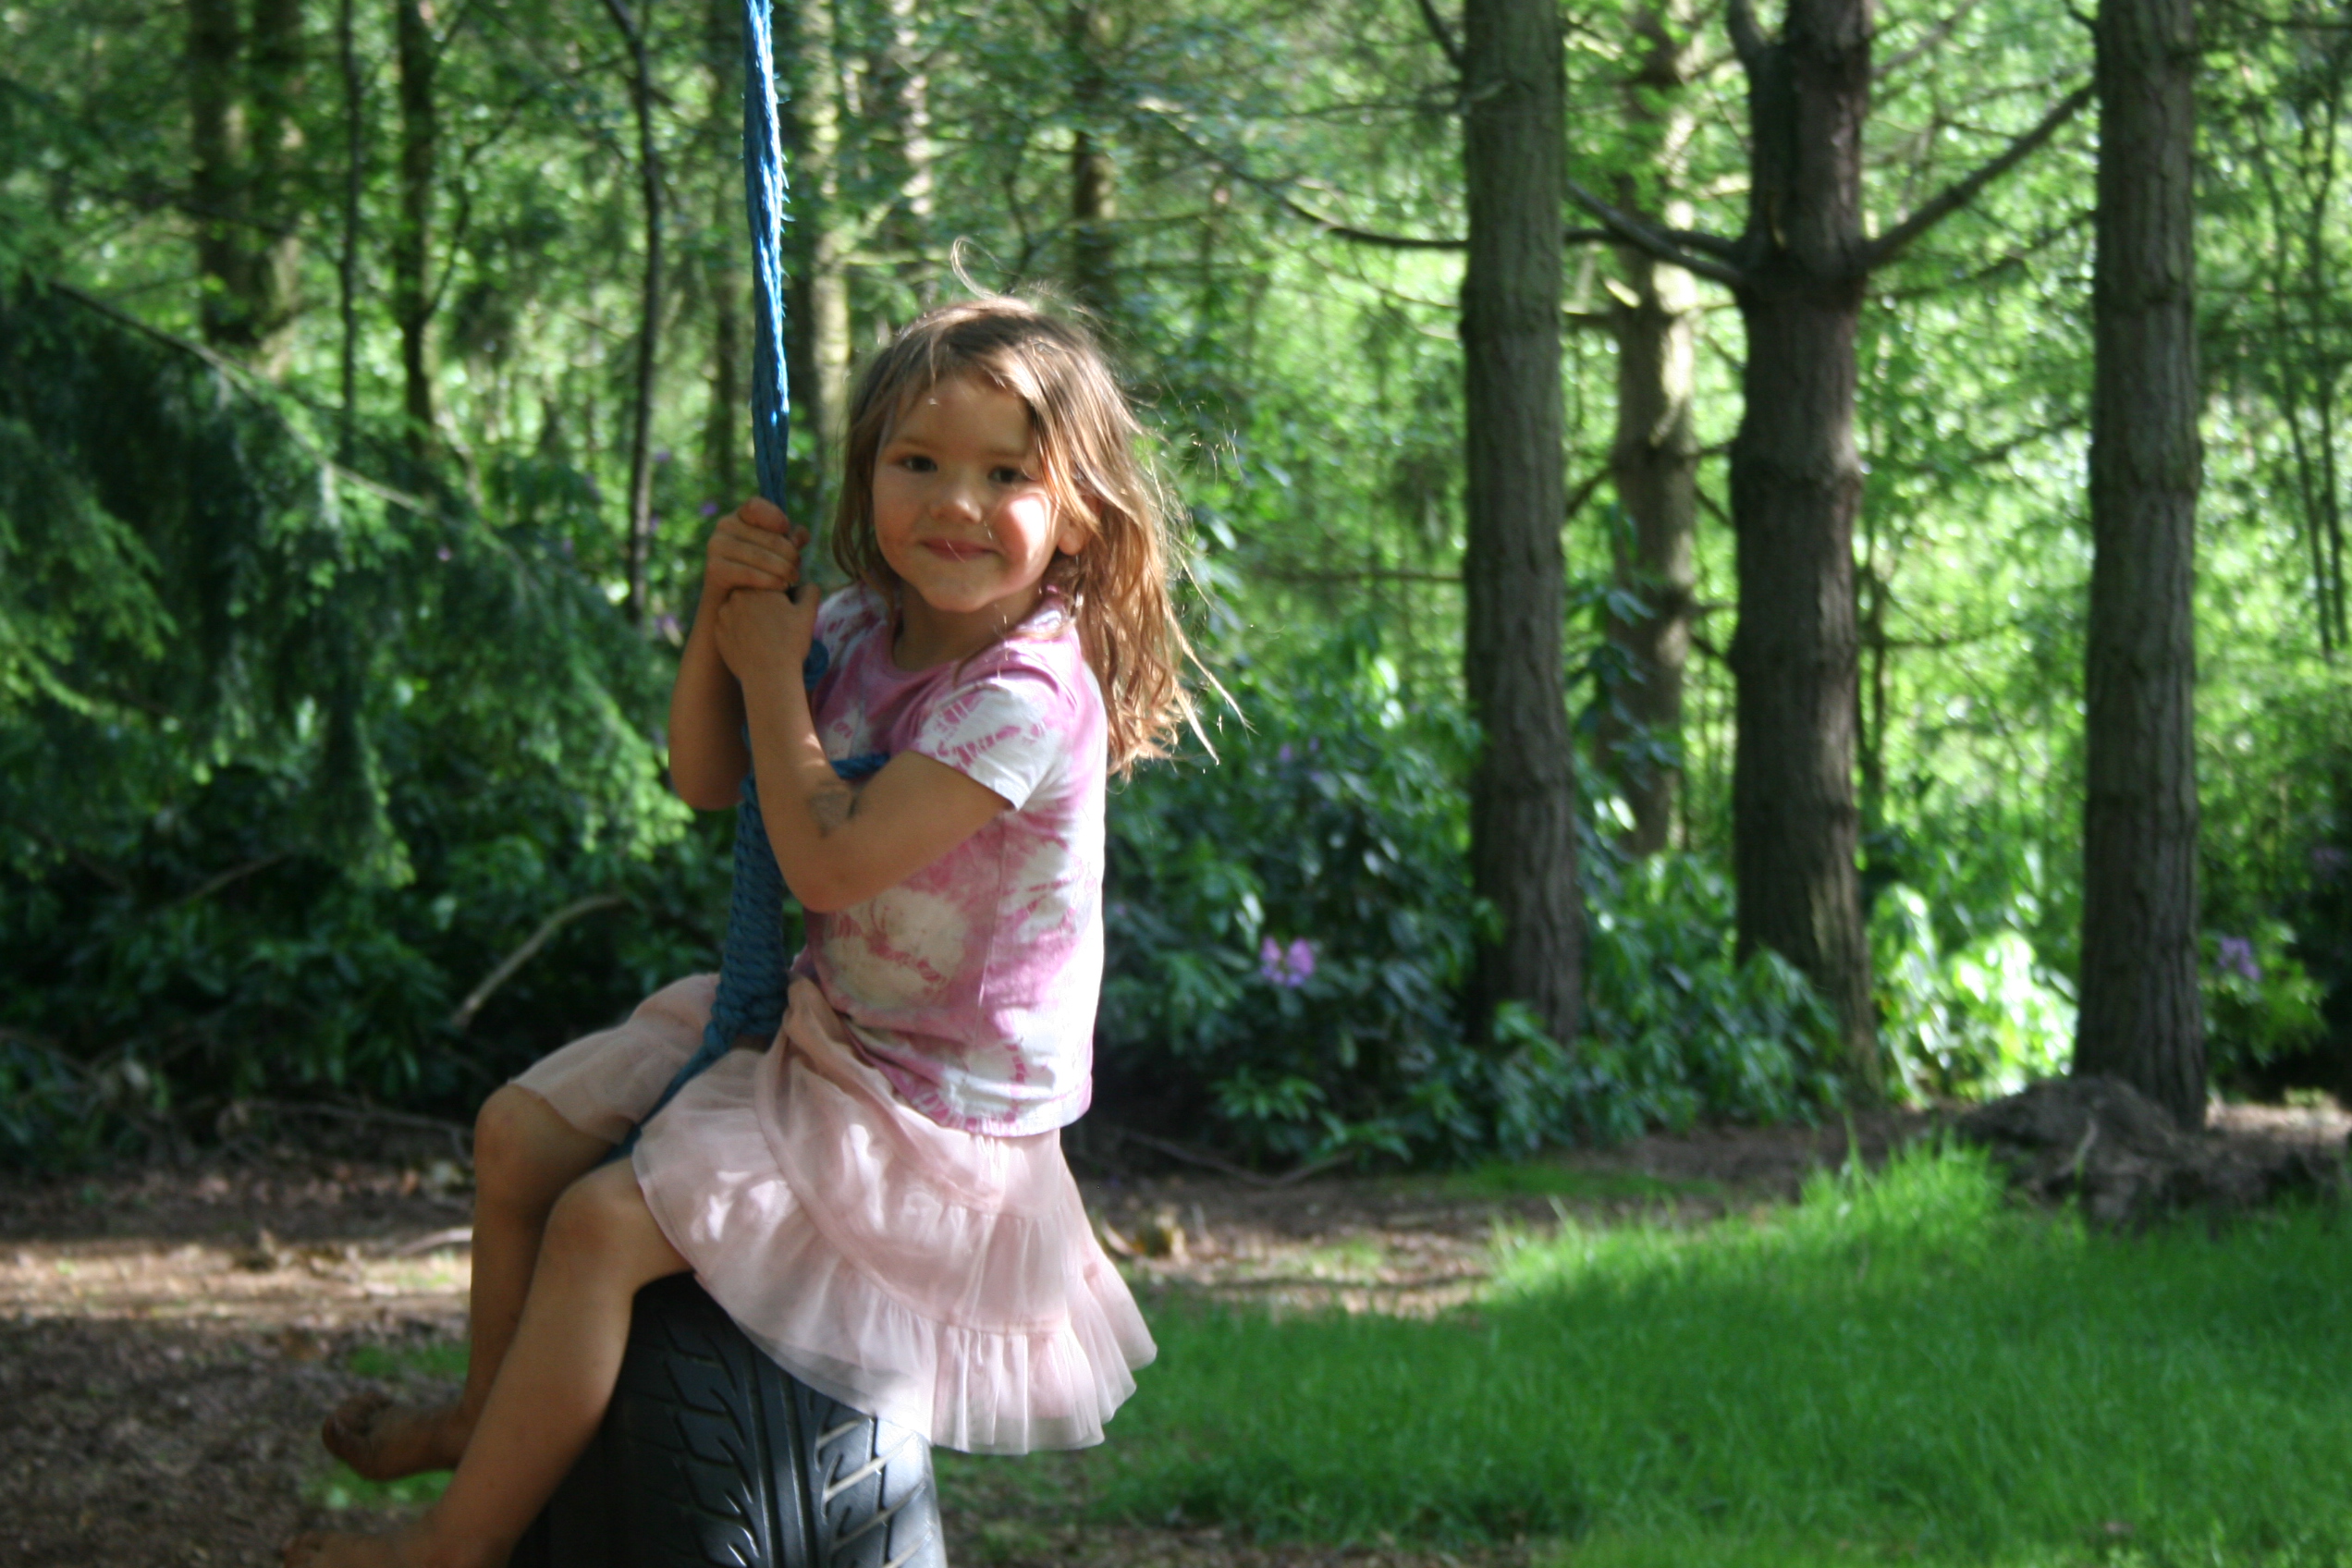 A child on a tyre swing in woodland